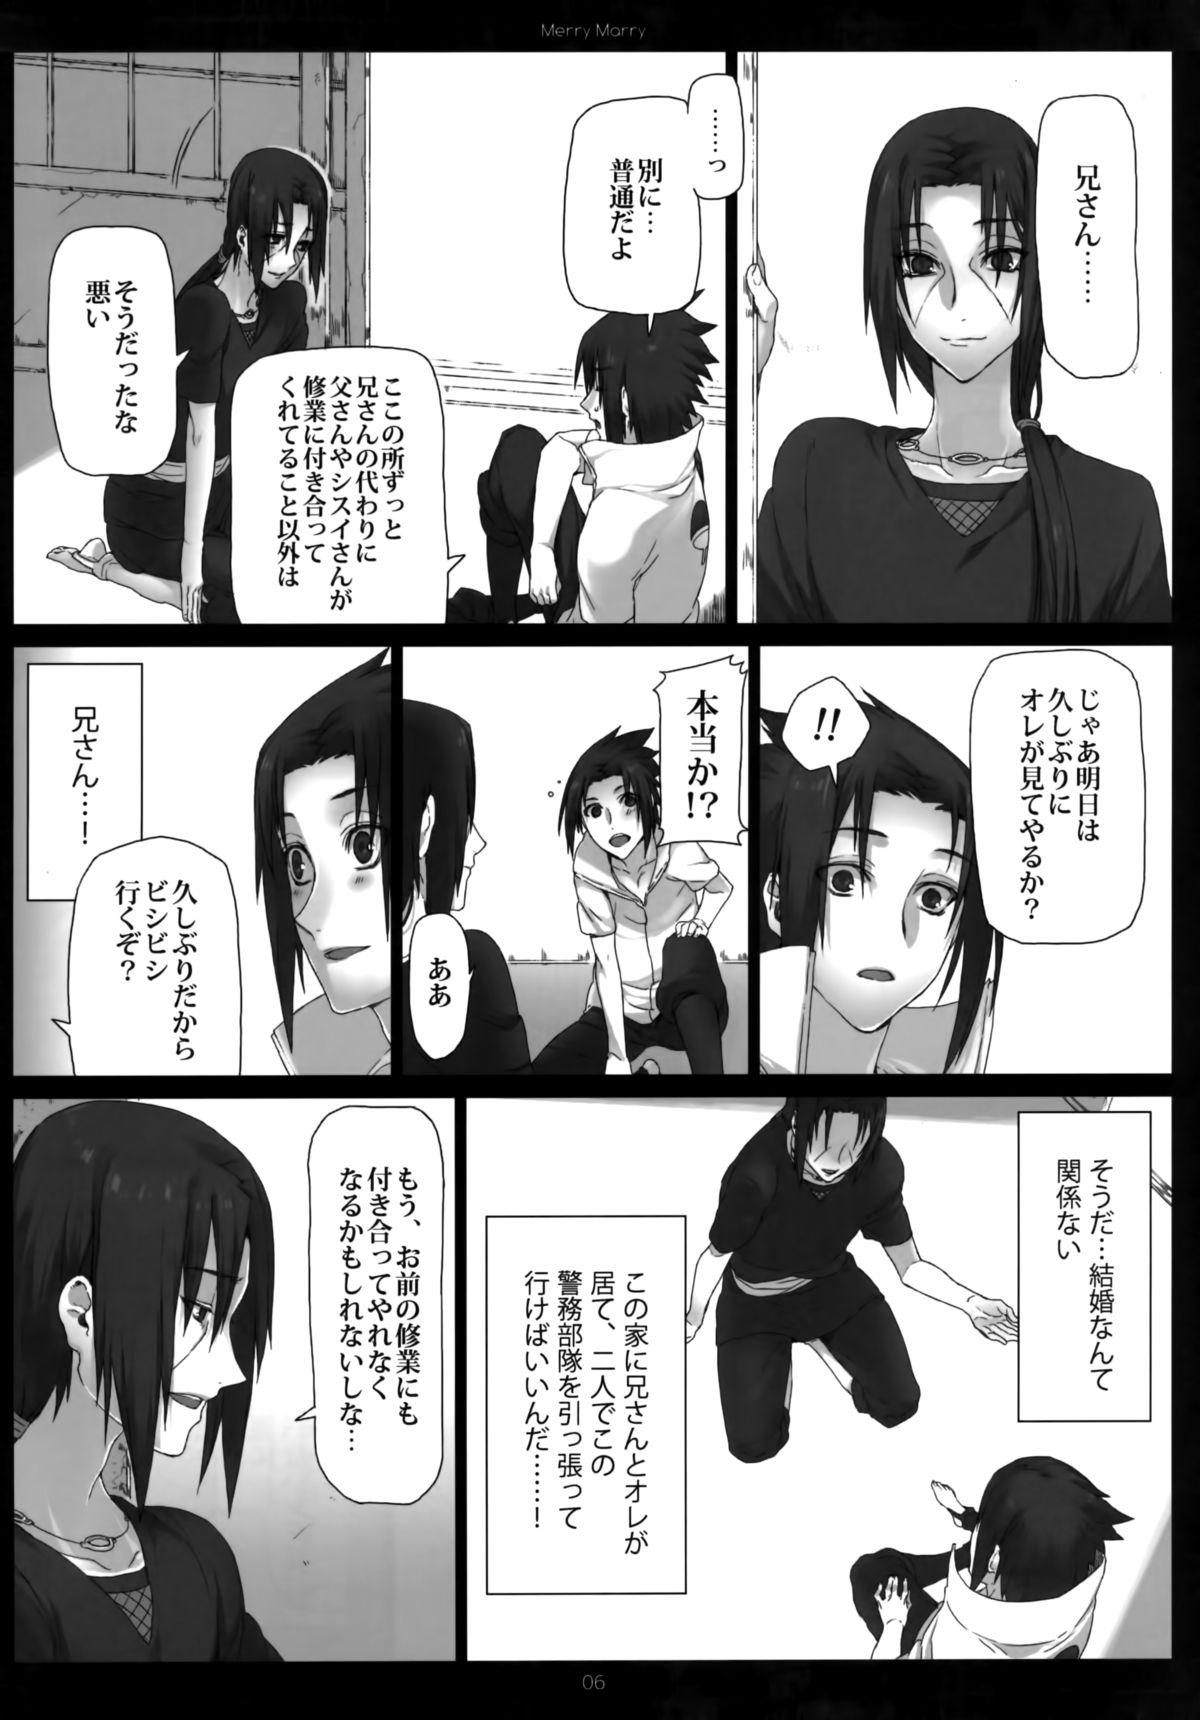 Hymen Merry Marry - Naruto Fisting - Page 6